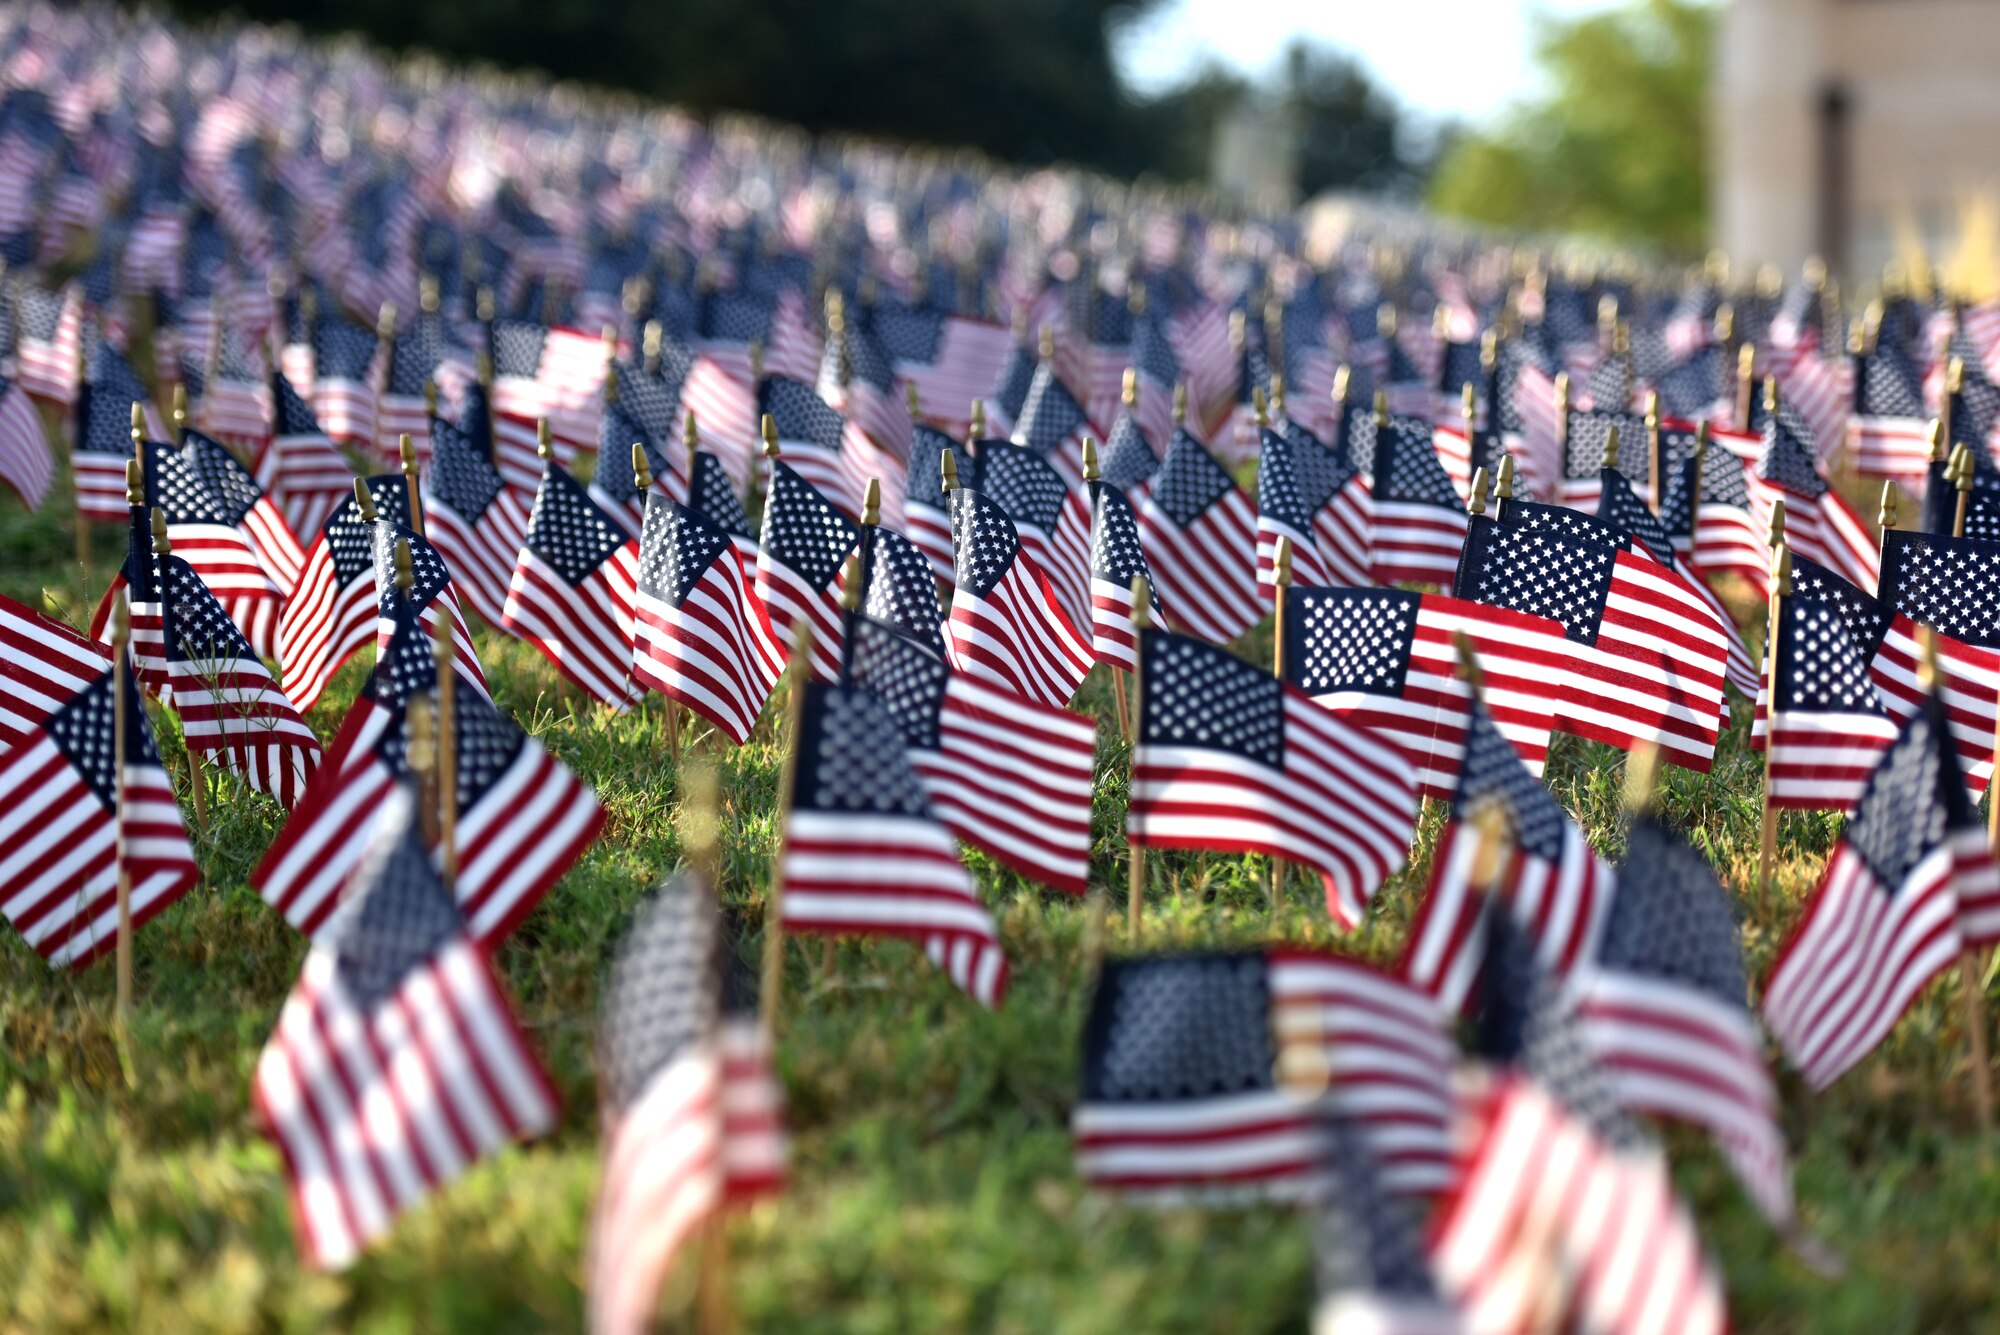 Small flags on display outside the San Angelo Fine Arts Museum during the 9/11 Memorial Ceremony in San Angelo, Texas, Sept. 11, 2019. Nearly 3,000 flags were displayed to honor all those who lost their lives in the collapse of the World Trade Center. (U.S. Air Force photo by Senior Airman Seraiah Wolf/Released)